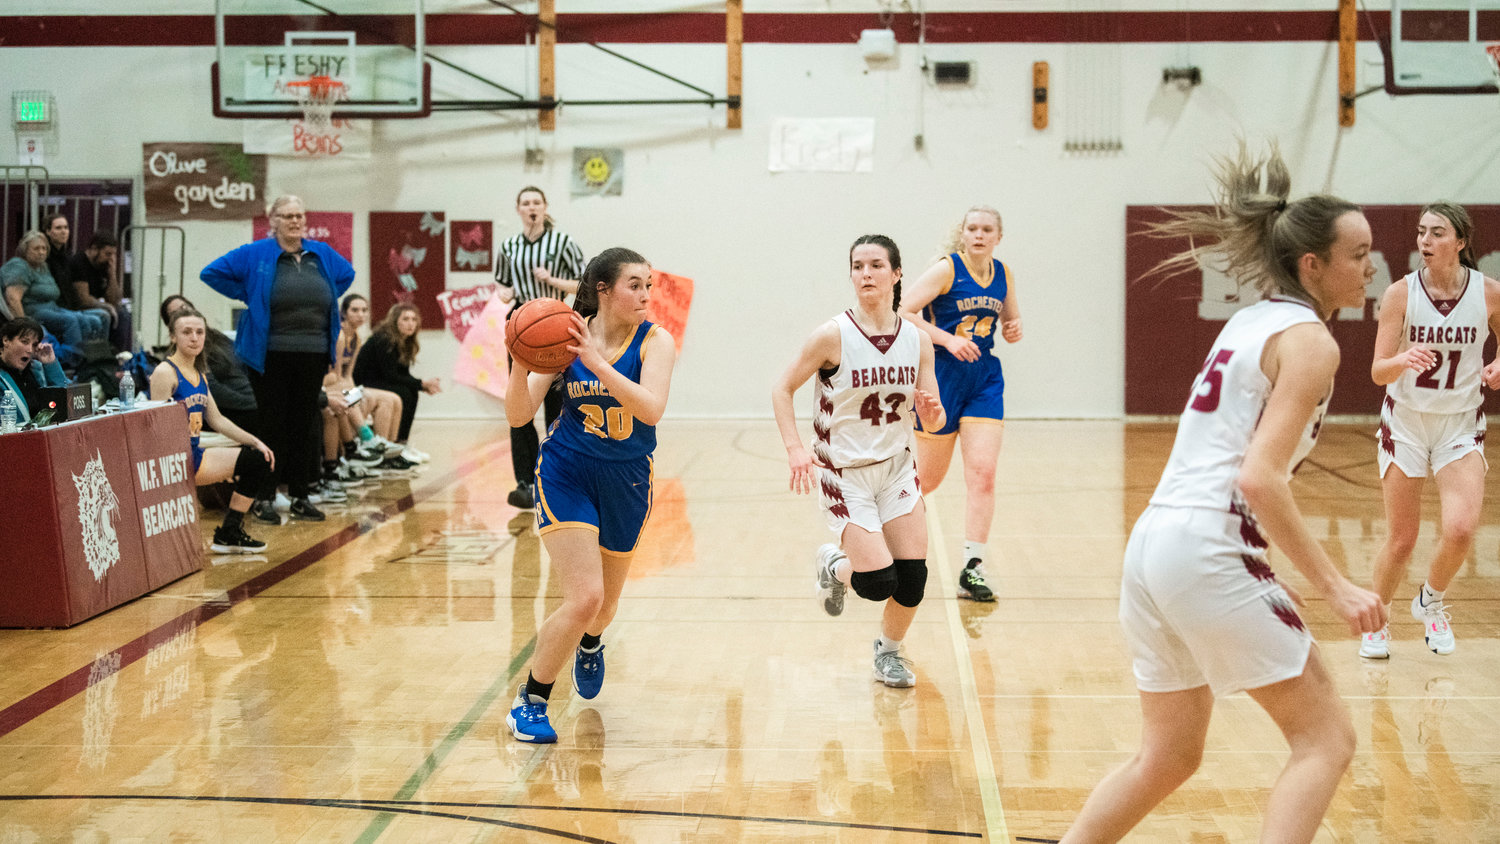 Rochester’s Roisin Stull (30) looks to pass during a game against W.F. West in Chehalis Thursday night.